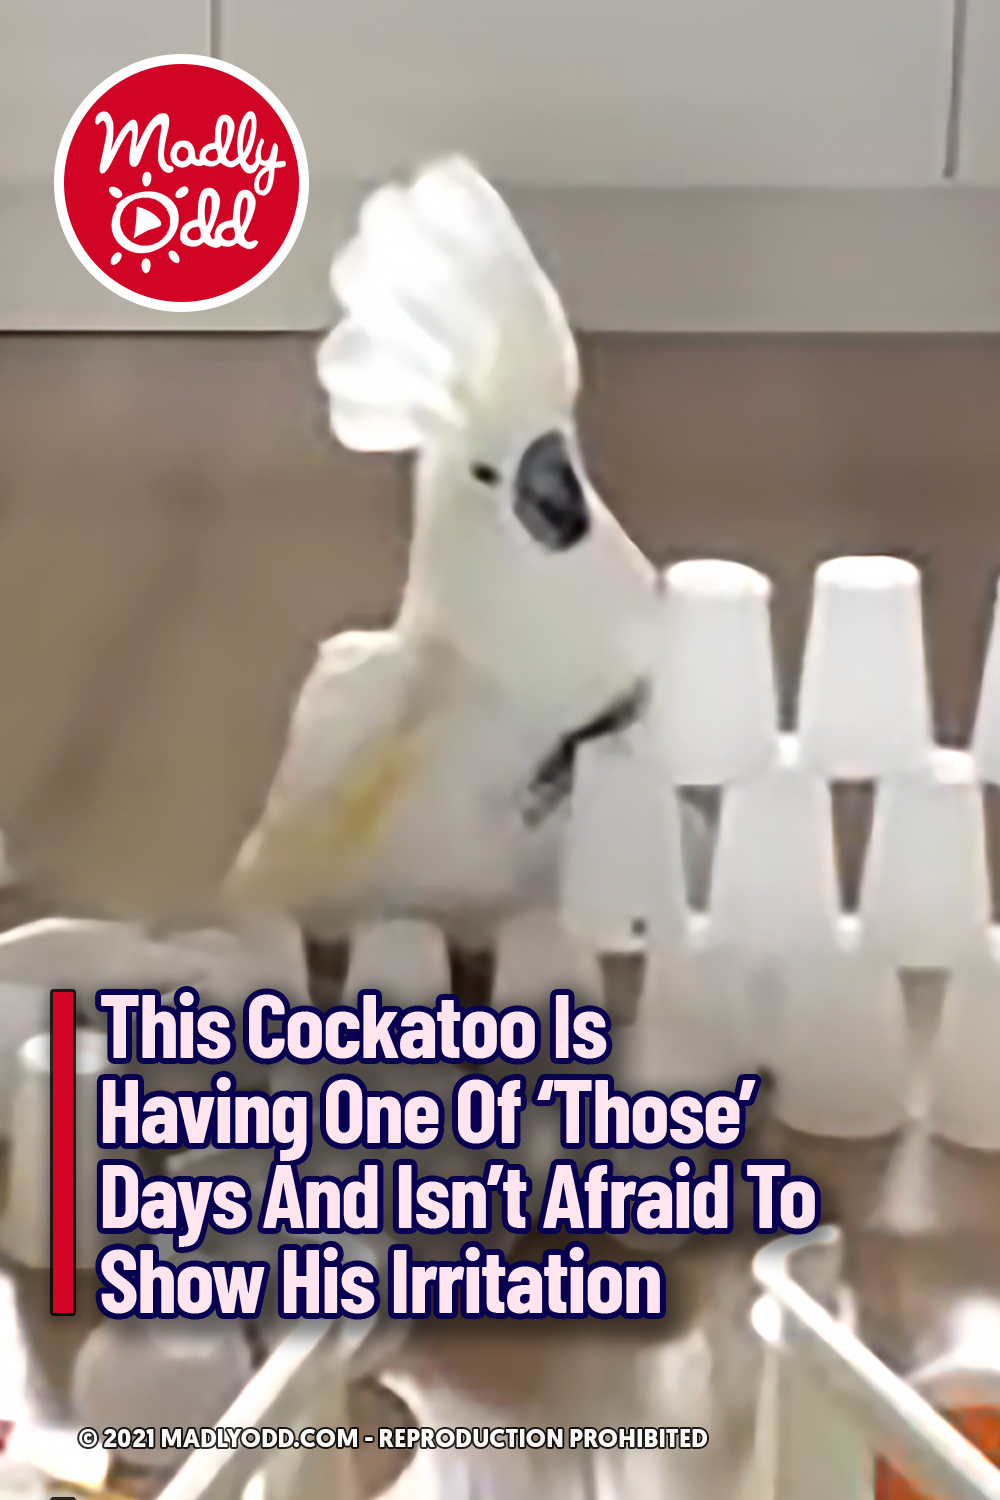 This Cockatoo Is Having One Of \'Those\' Days And Isn\'t Afraid To Show His Irritation